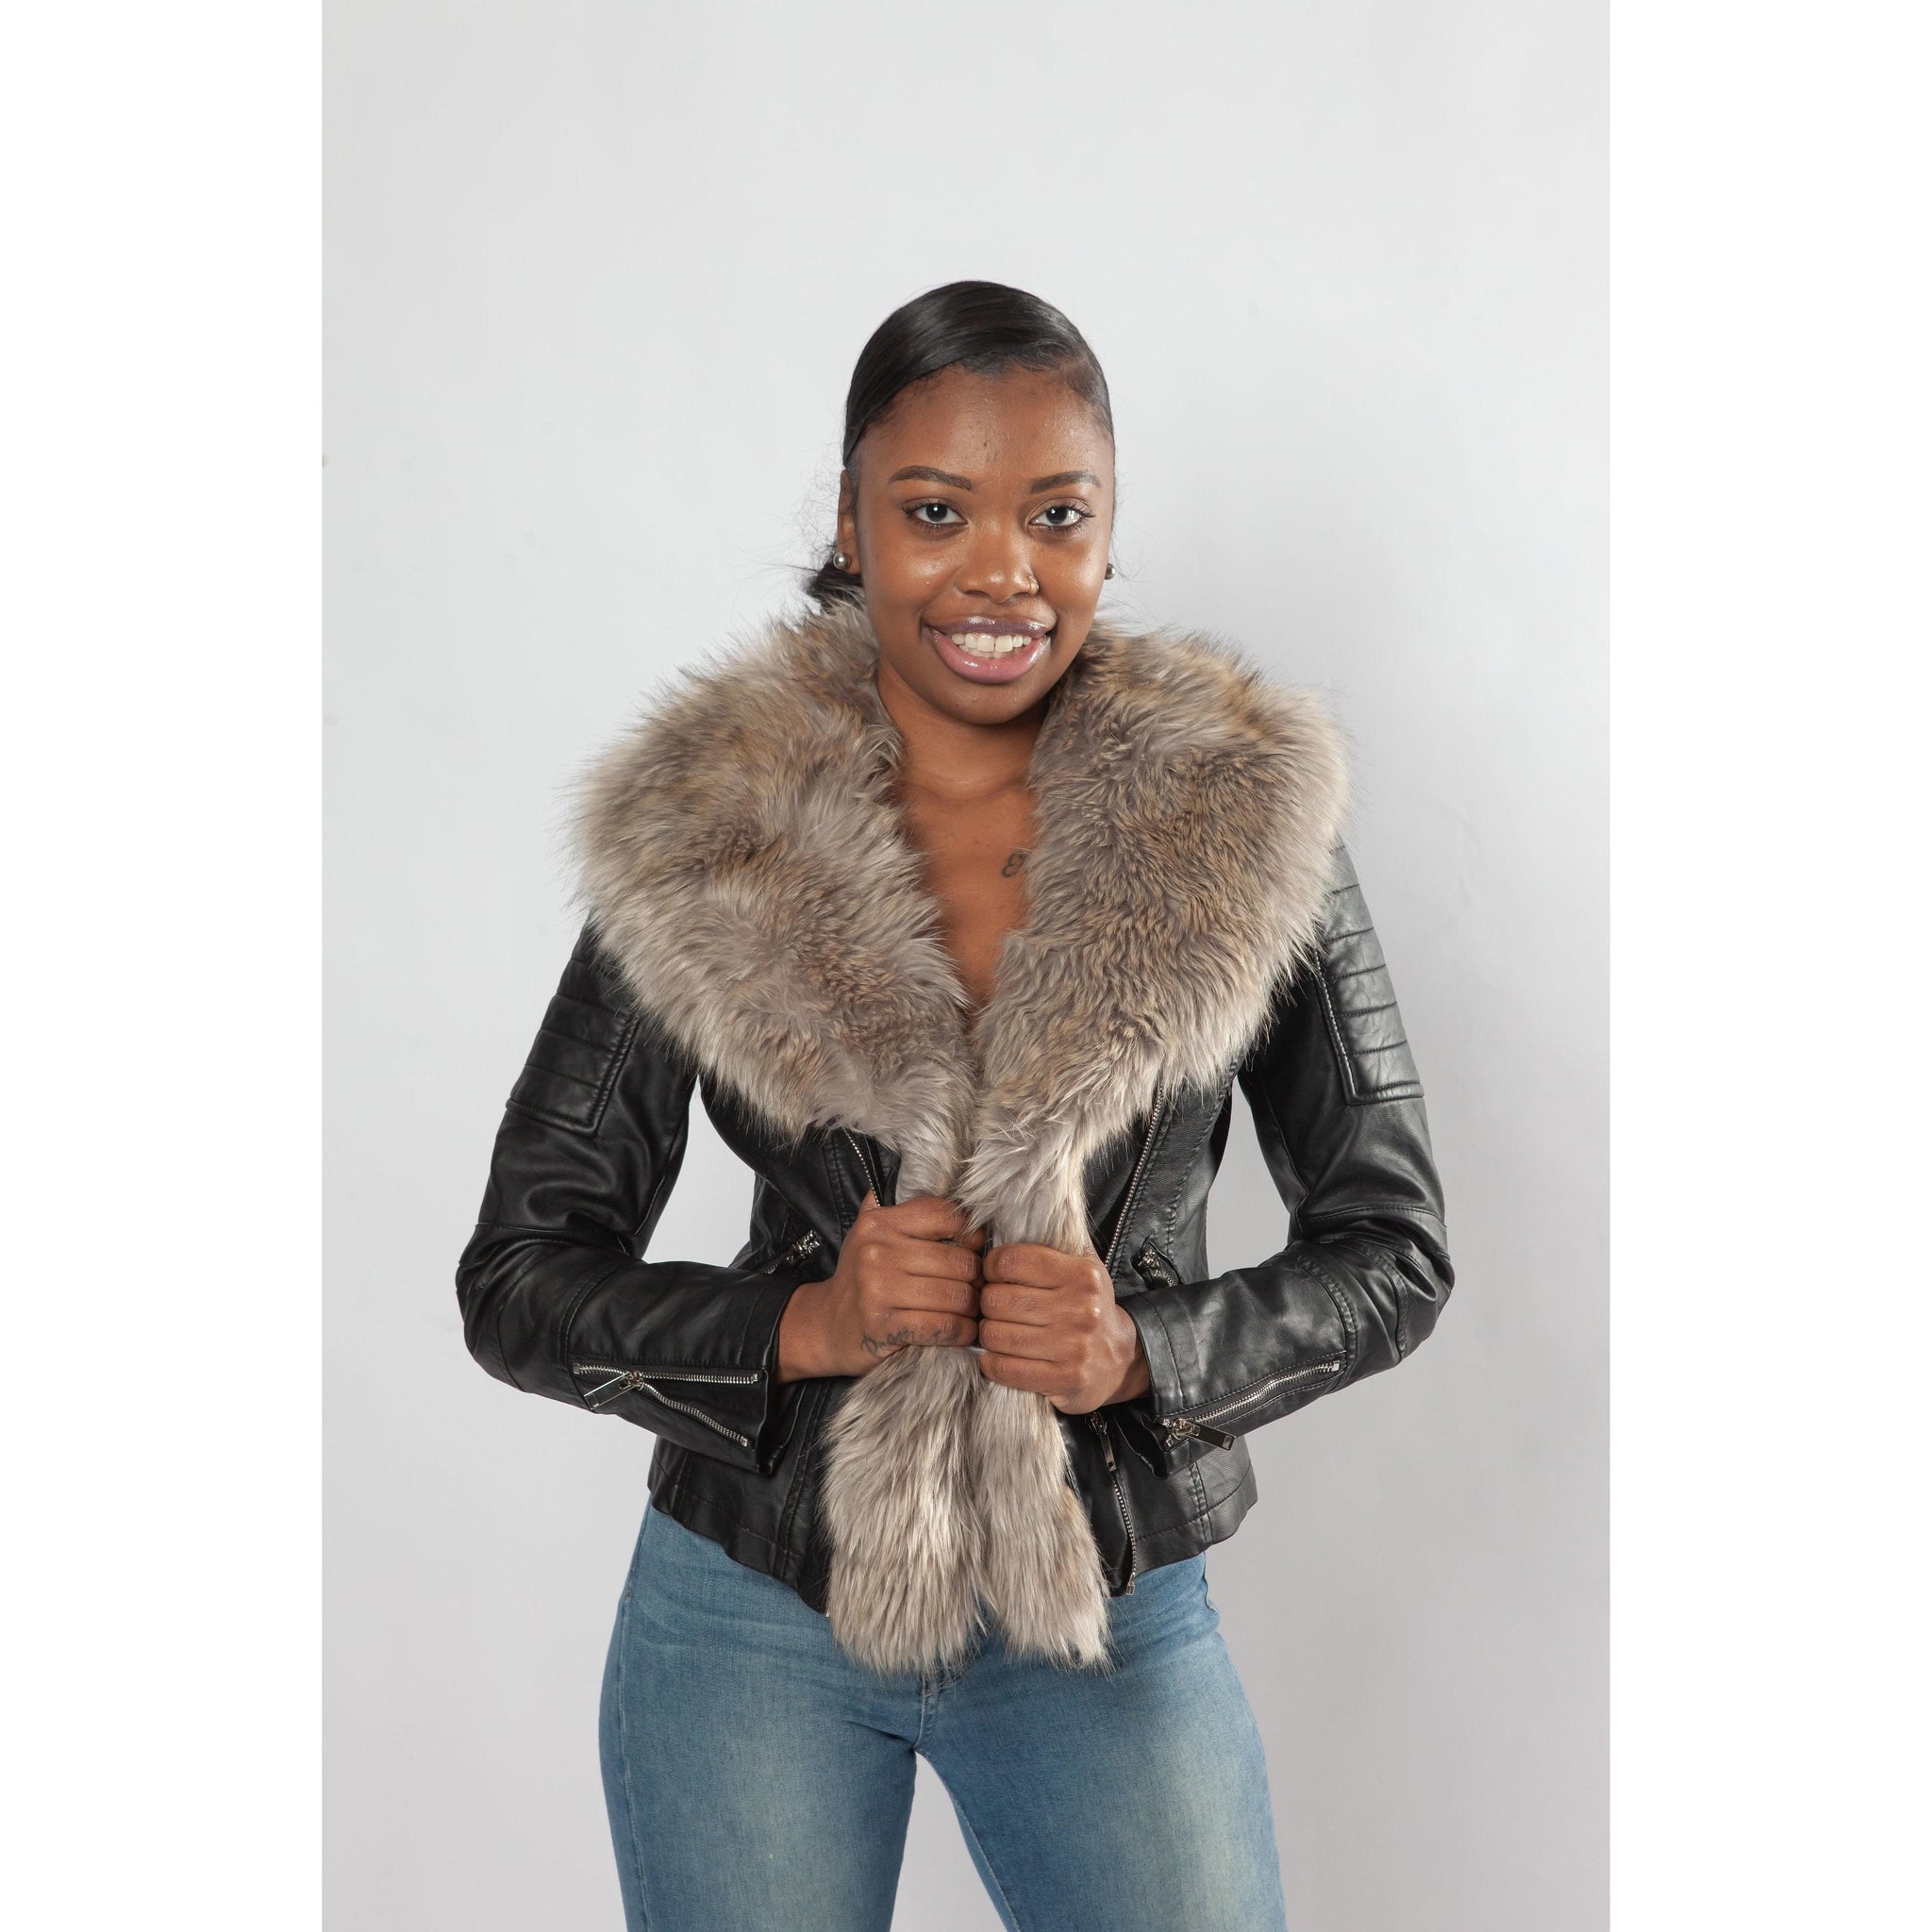 Can U Handle It - Leather Jacket - Crown Jewels Boutique